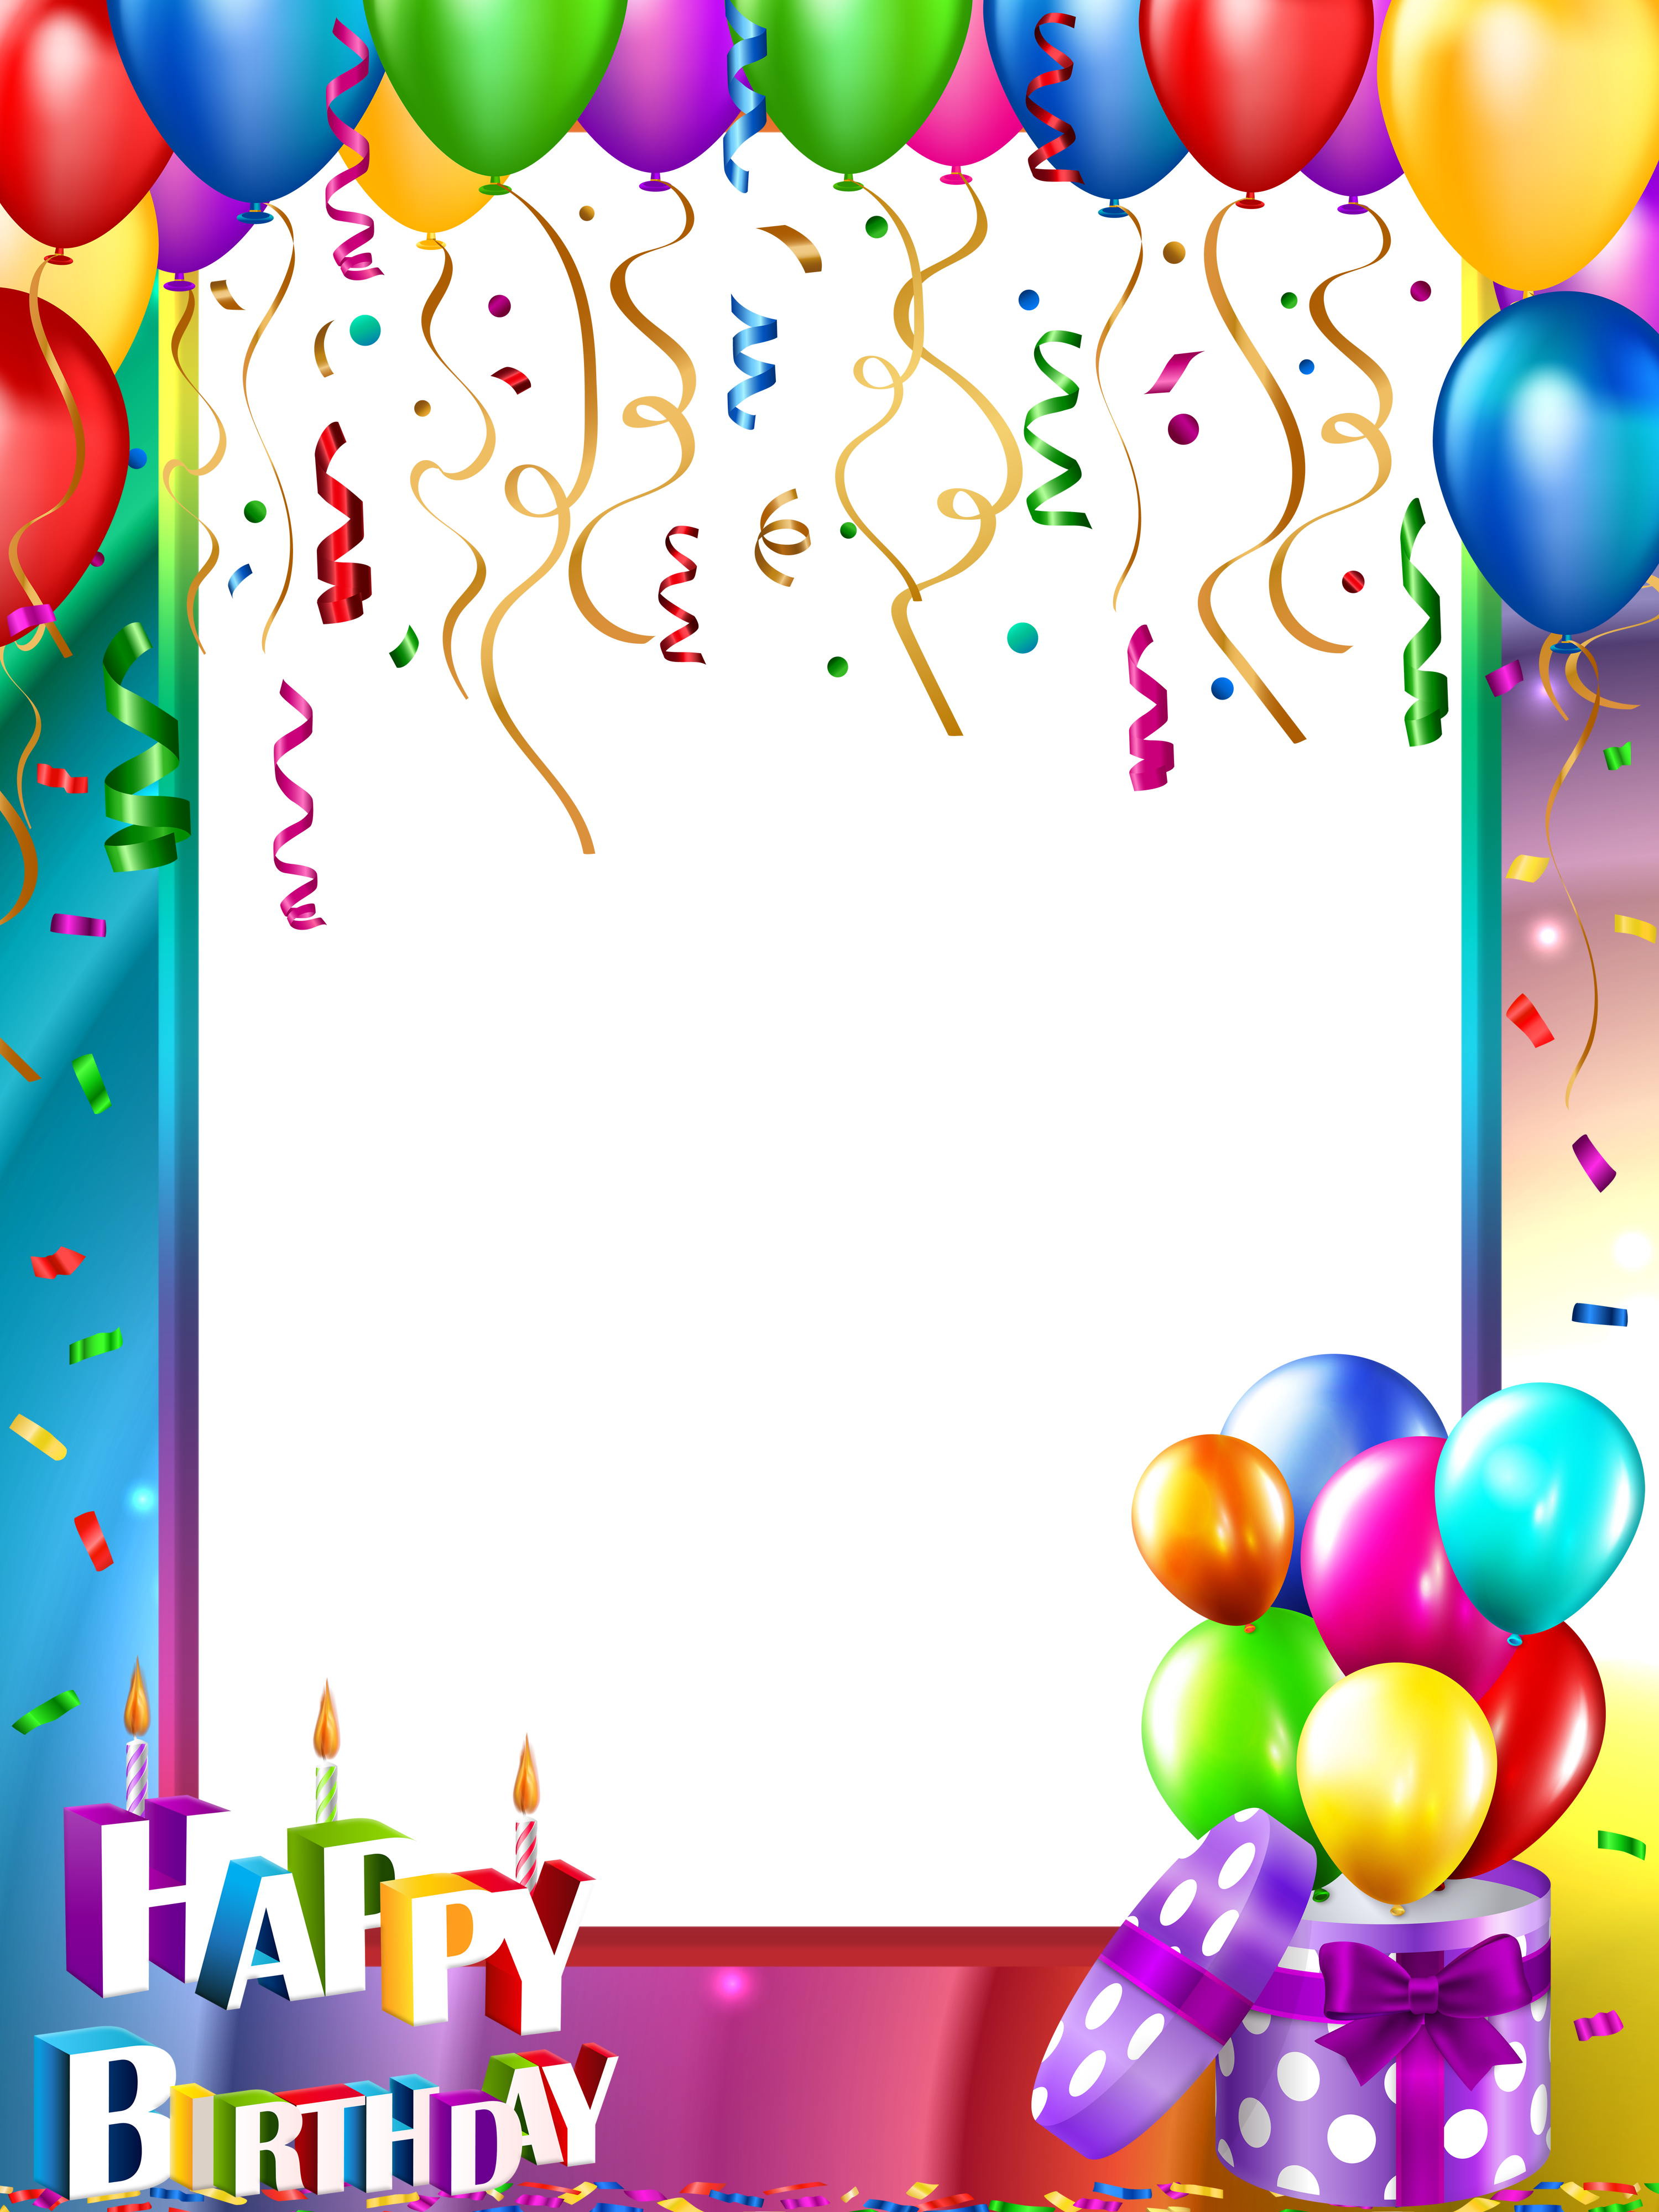 Birthday Frame PNG Image Background